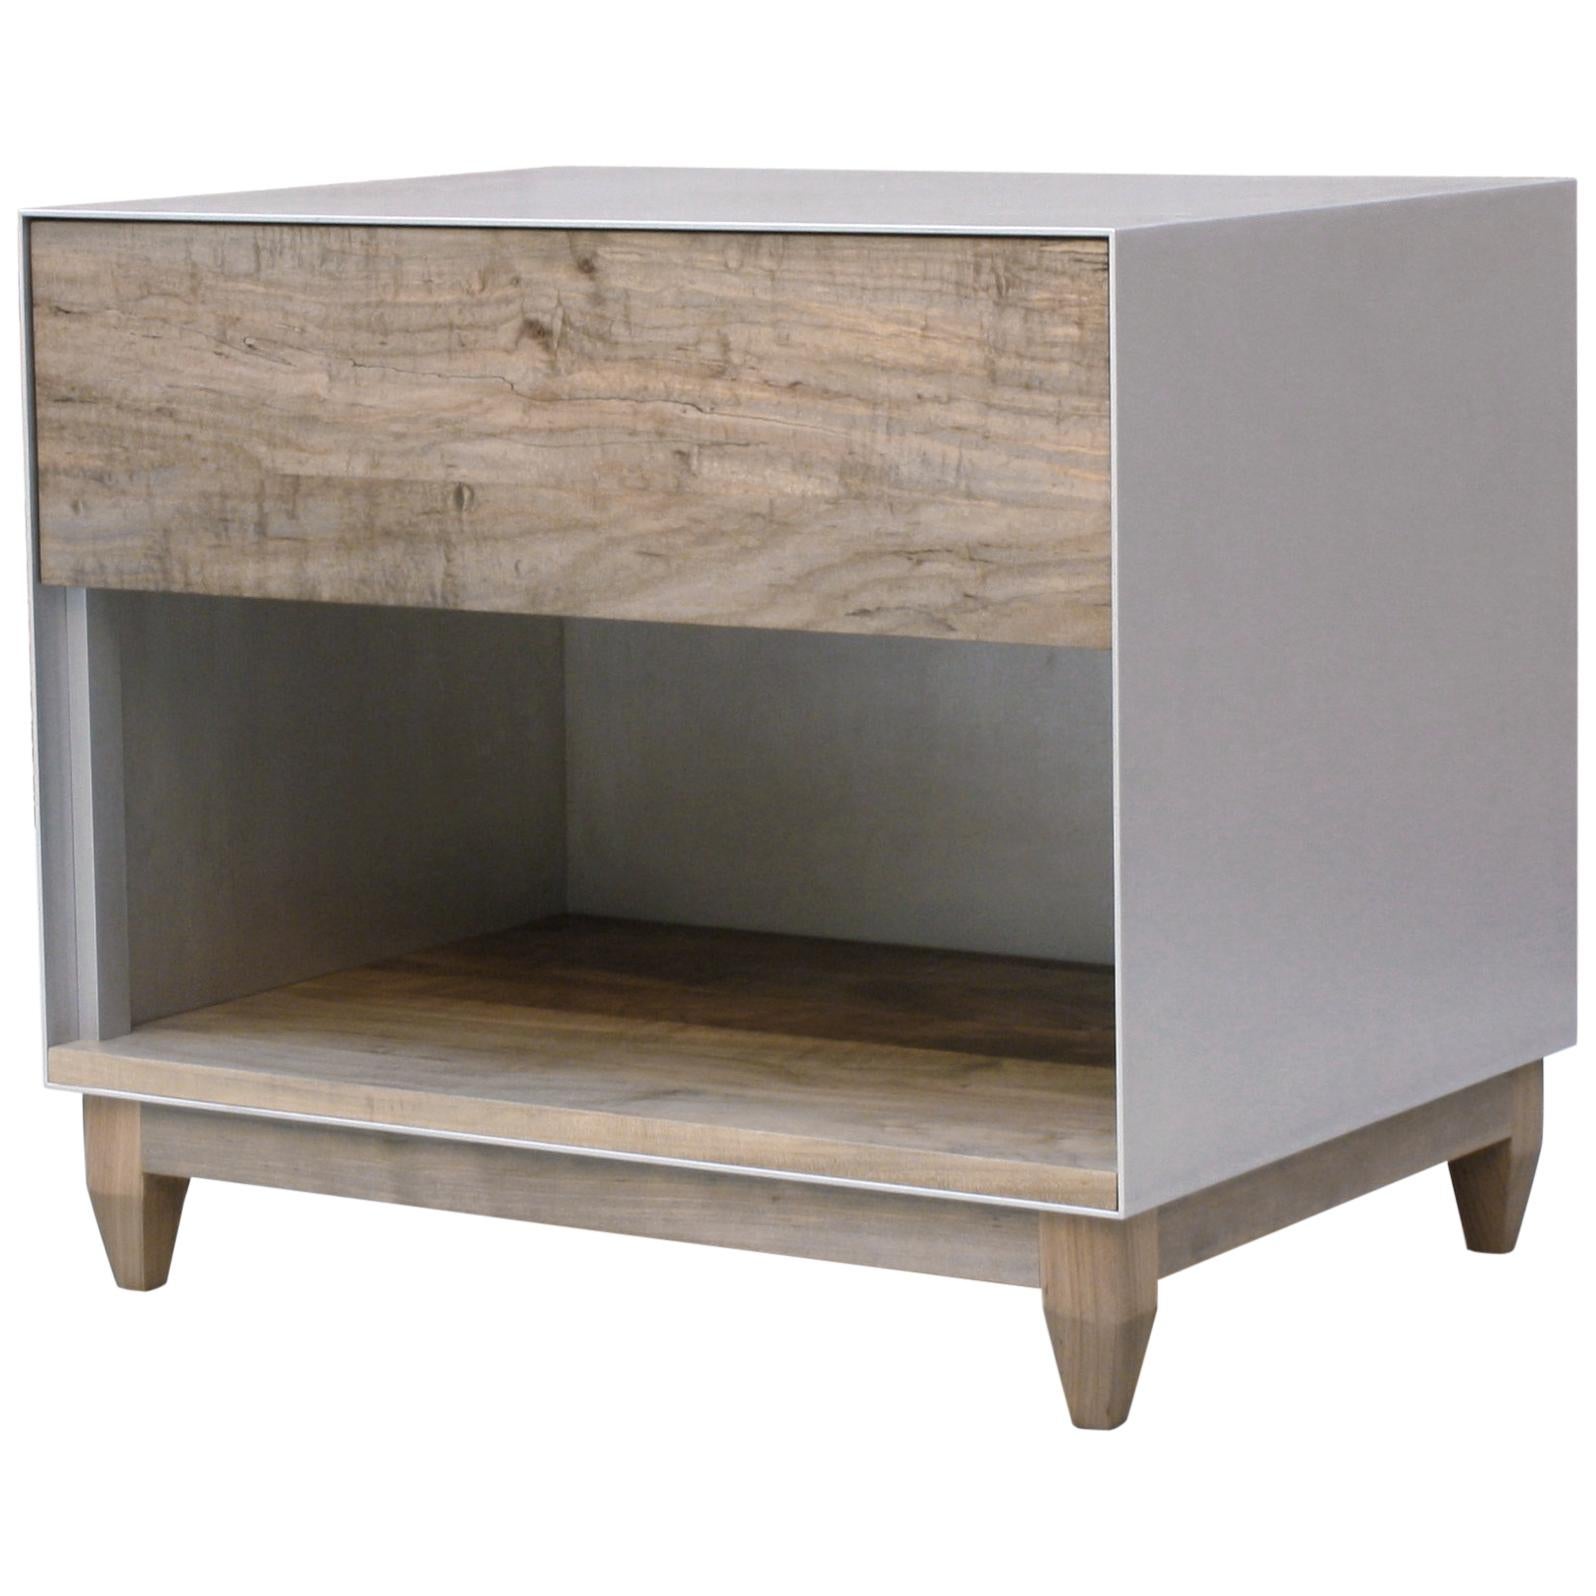 Oxide, Handmade Nightstand or Side Cabinet - Waxed Aluminum and Oxidized Maple For Sale